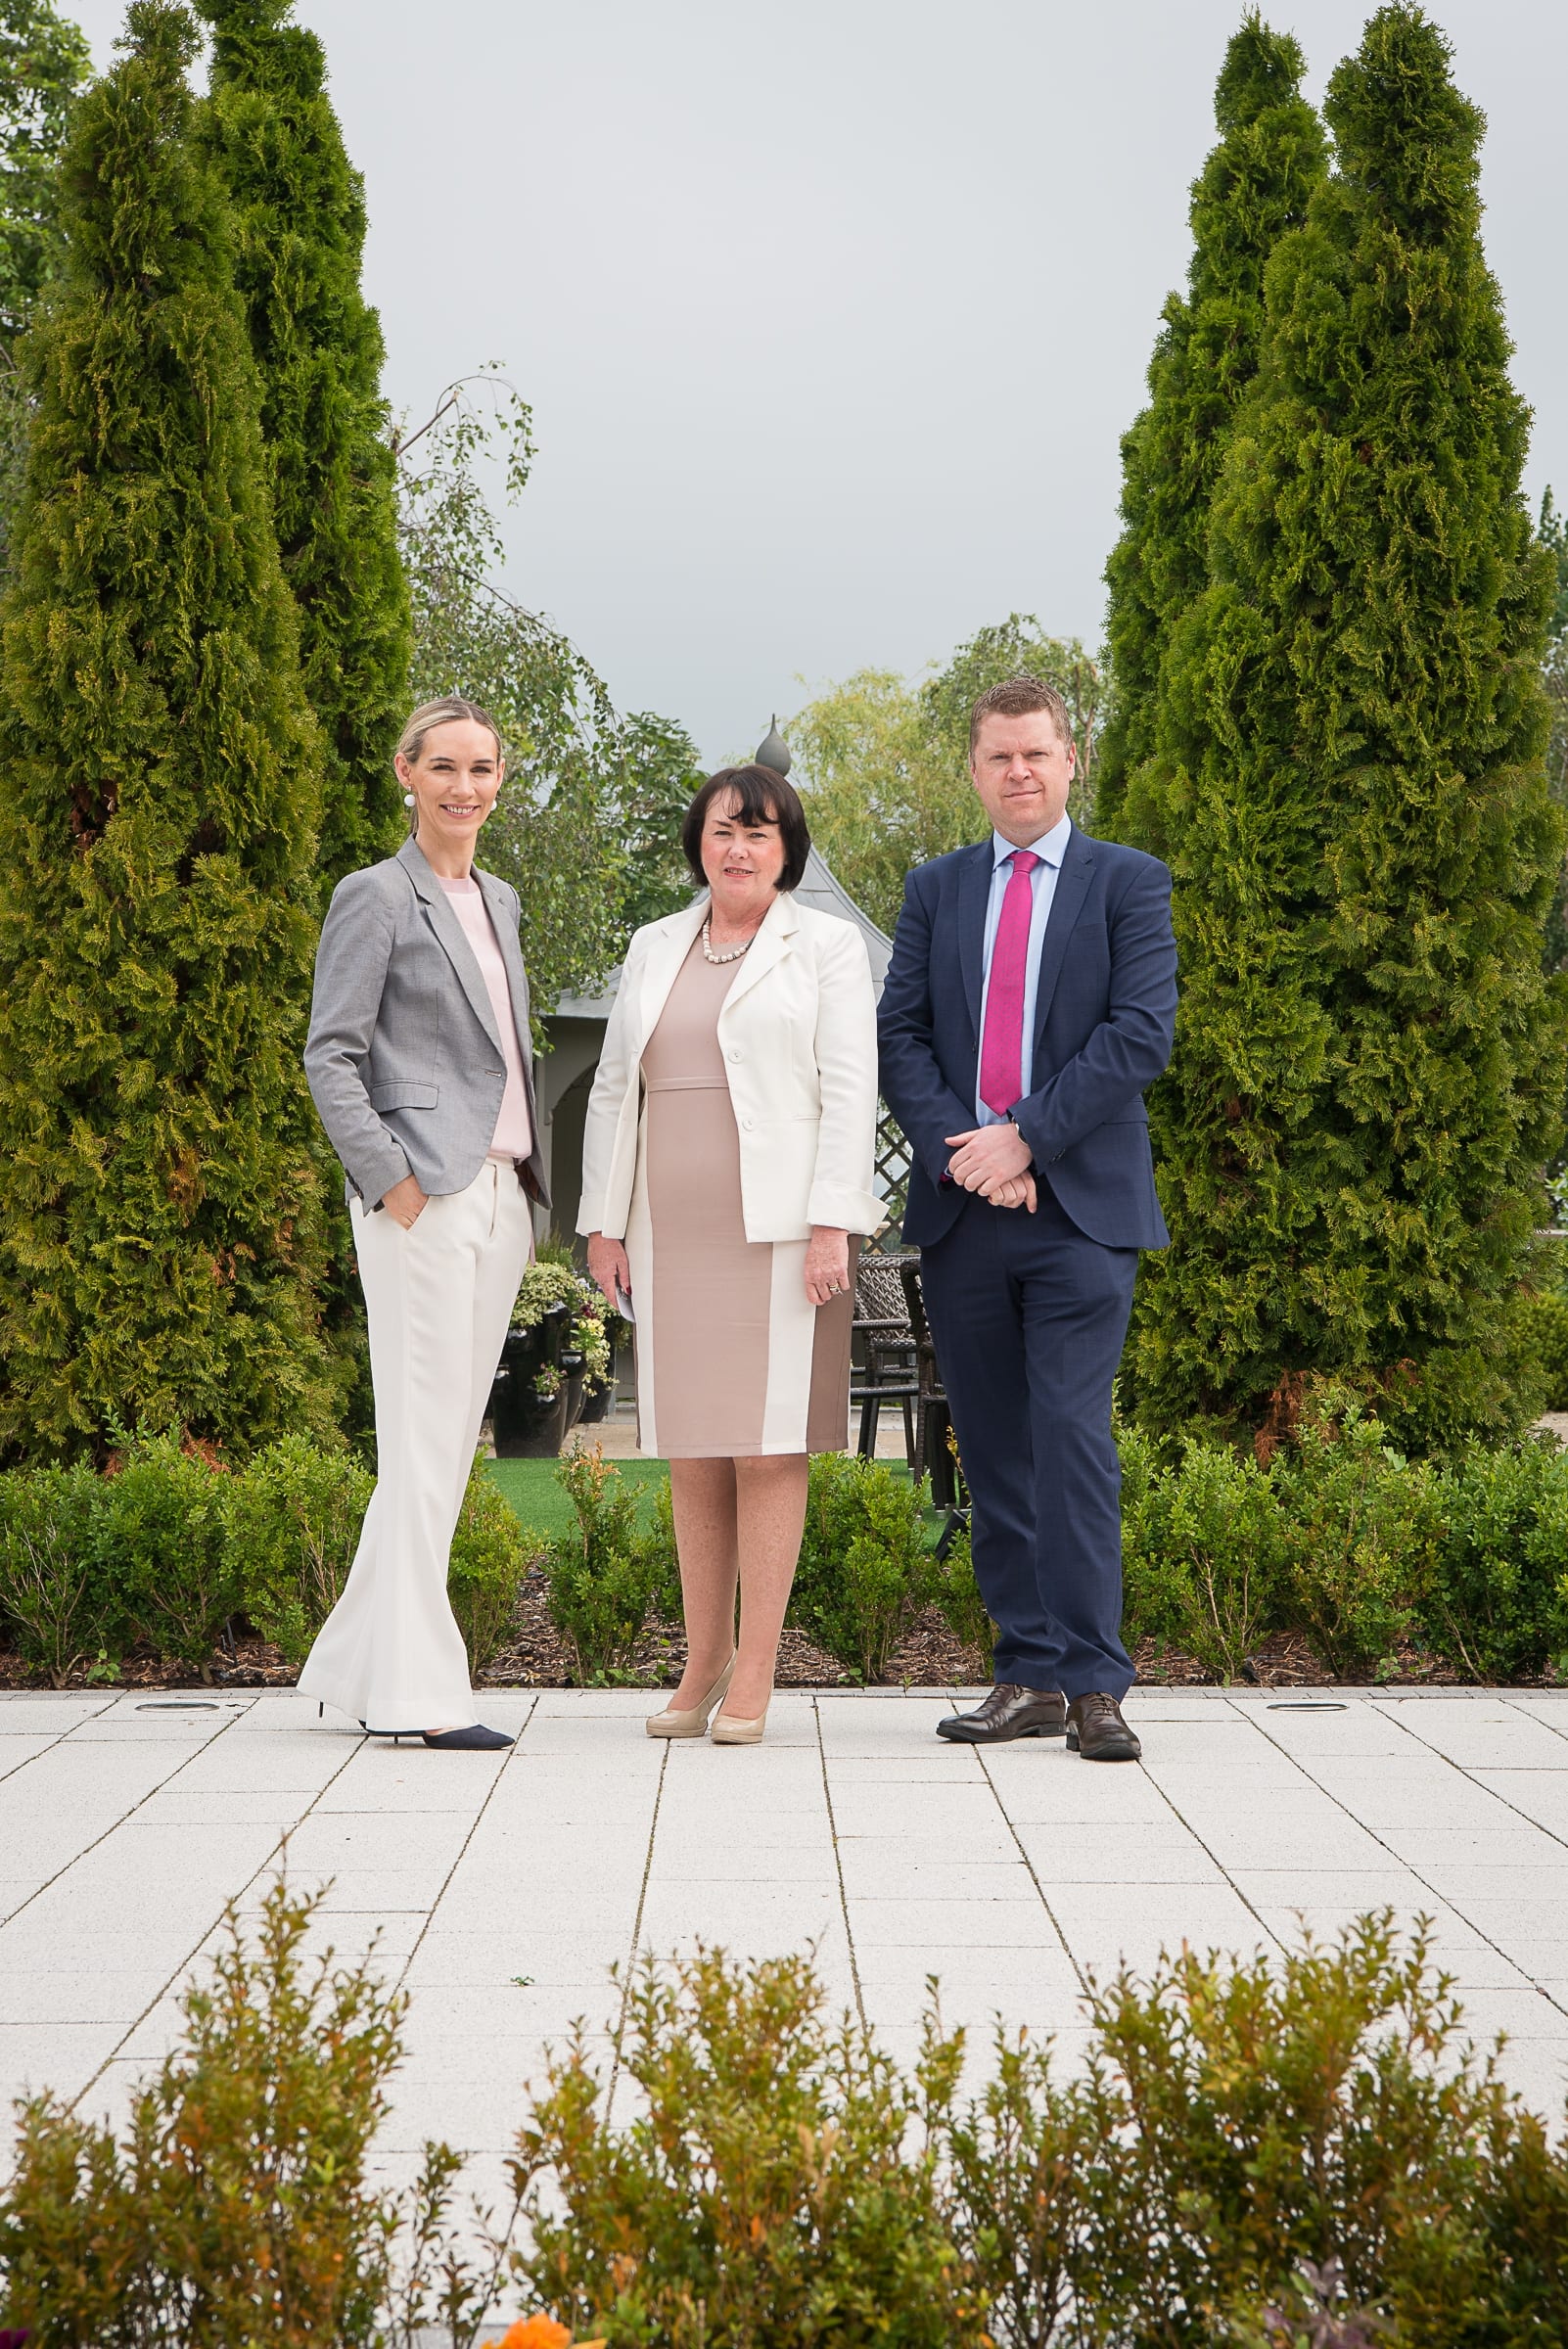 From Left to Right:  Launch of Limerick Chamber President Awards held in the Castletroy Park Hotel on 25th June 2019:  Deirdre Ryan - CEO Limerick Chamber, Caroline Long - CEO / LDCR,  Eoin Ryan - Limerick Chamber President / HLBMGR, 
Photo by Morning Star Photography